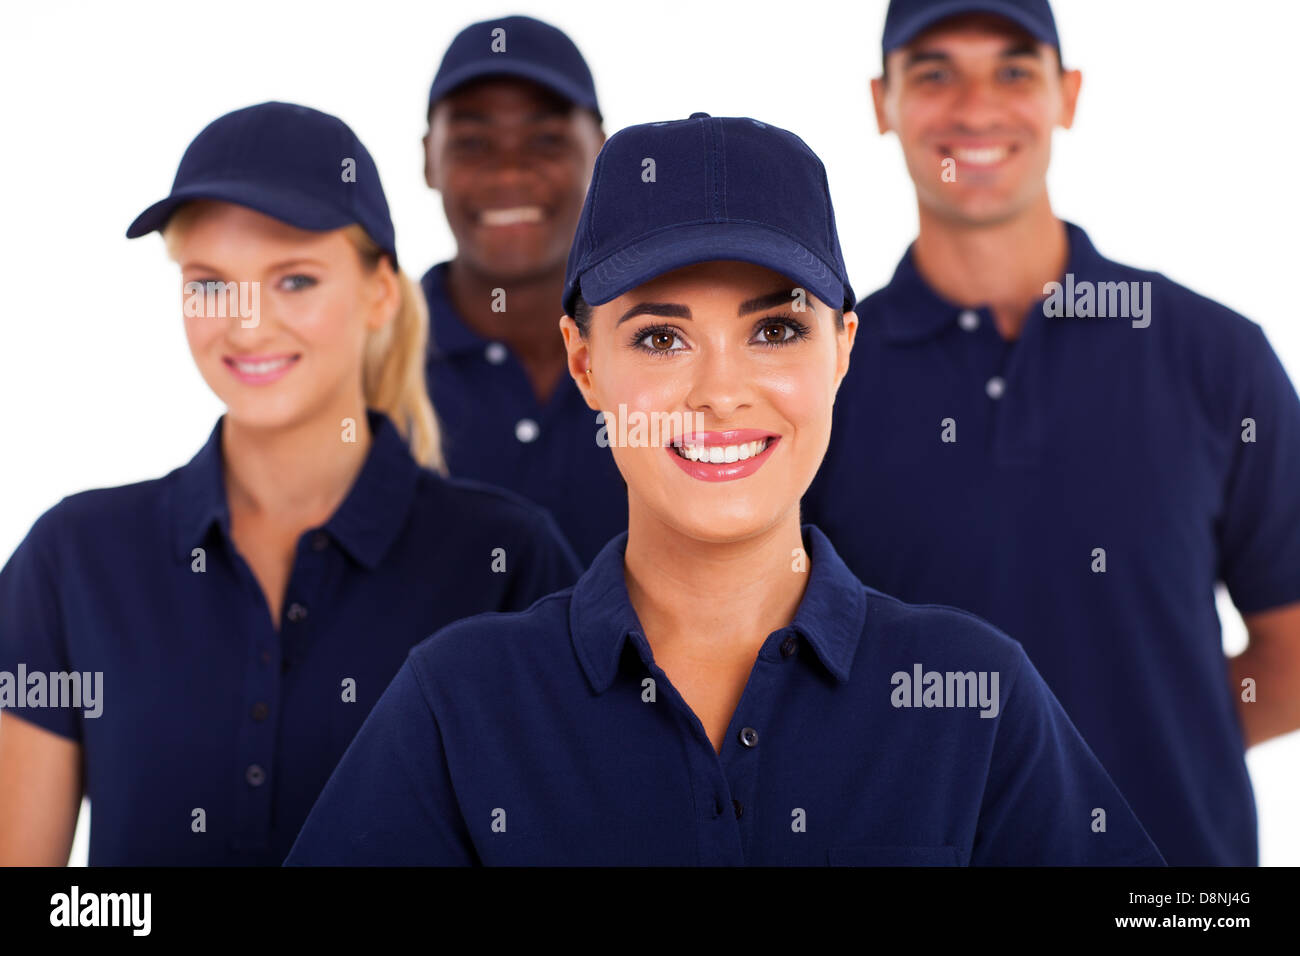 group of service industry staff closeup on white Stock Photo